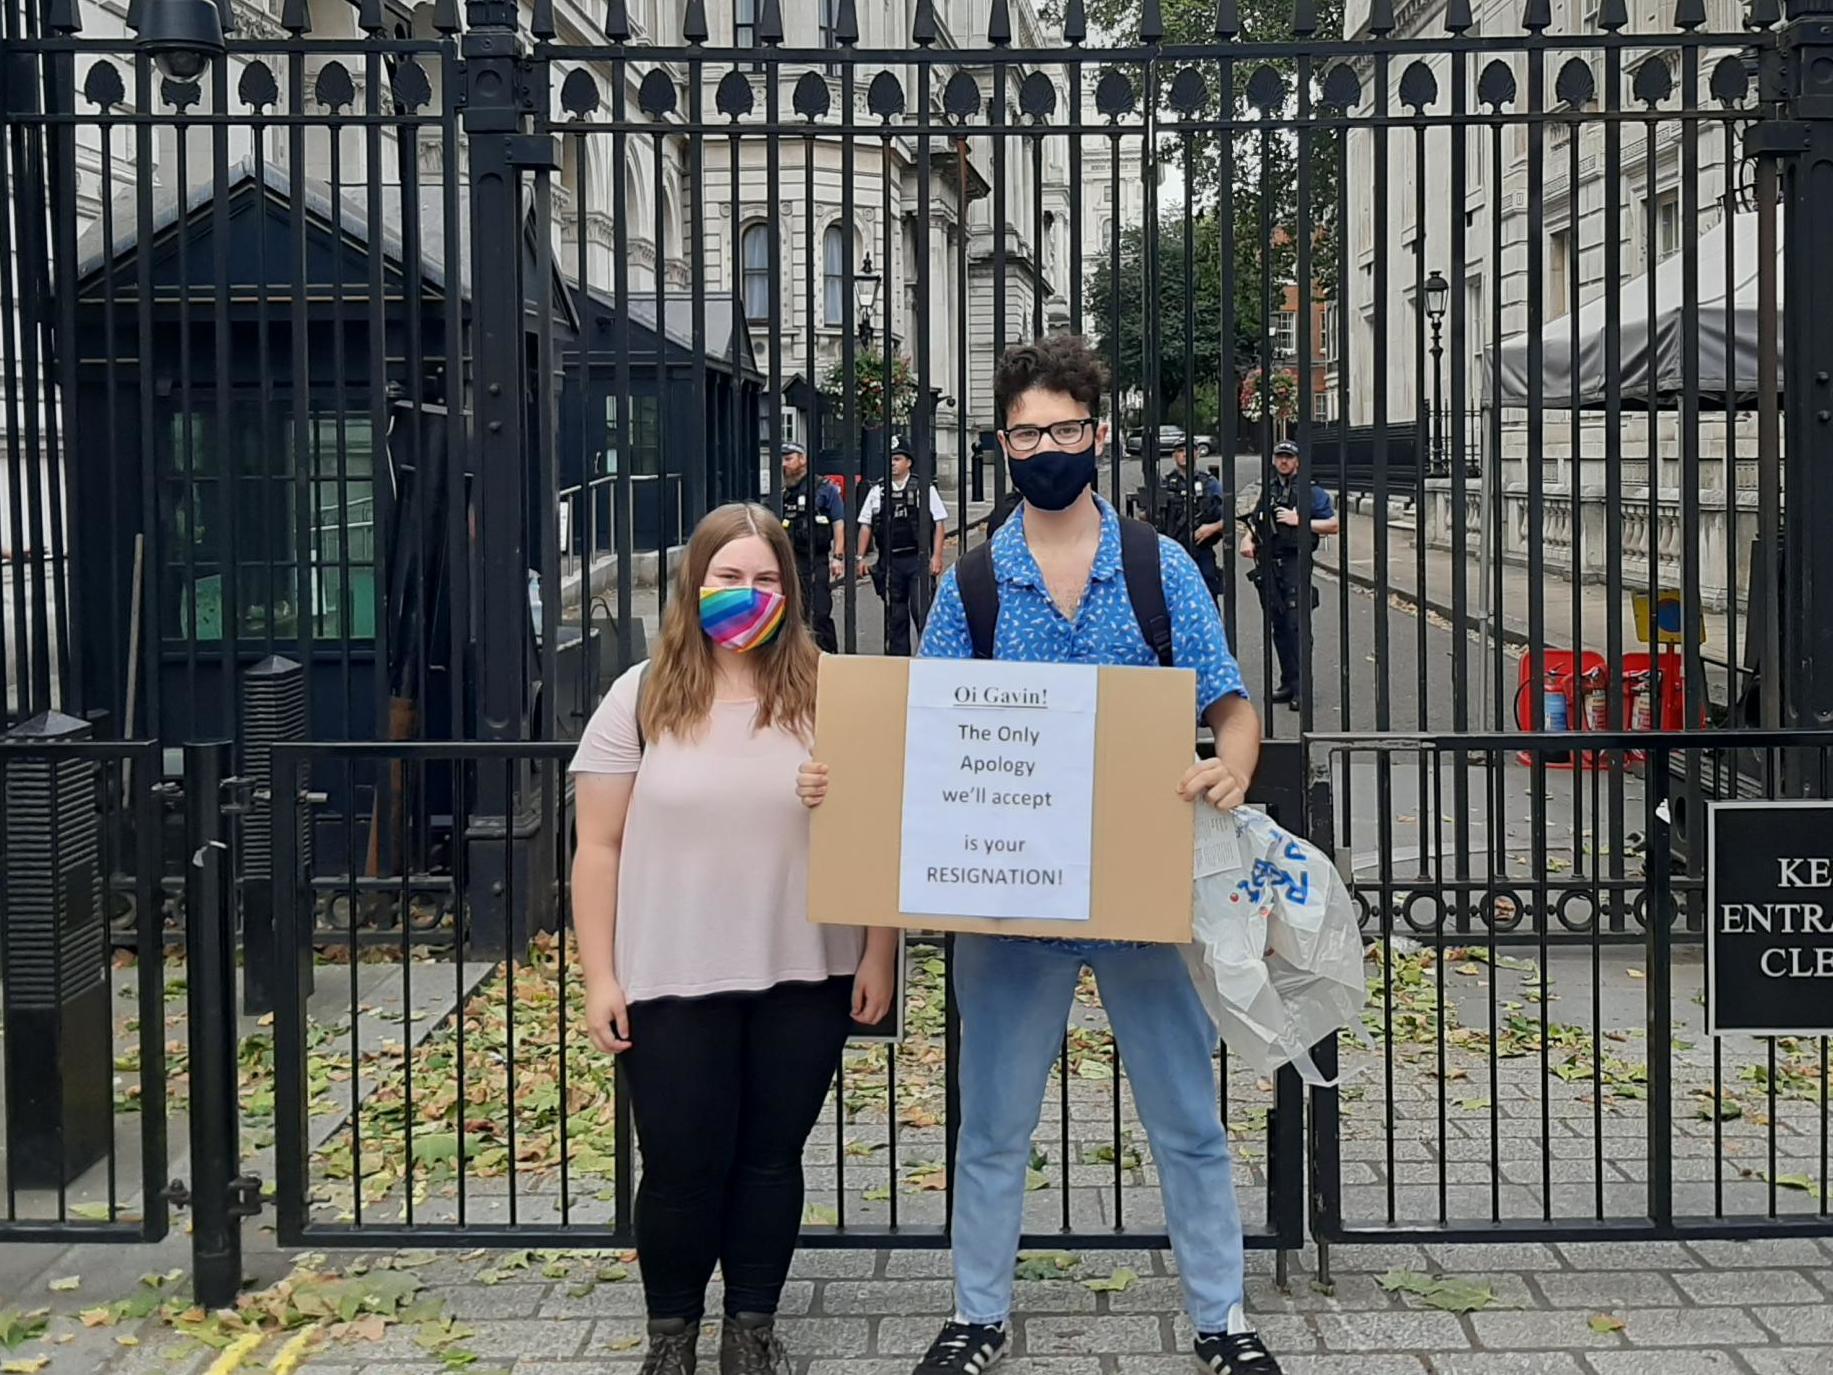 Georgia Hewett and Anselm Winner said they wanted to see accountability for what happened with exams this year (Zoe Tidman/The Independent)